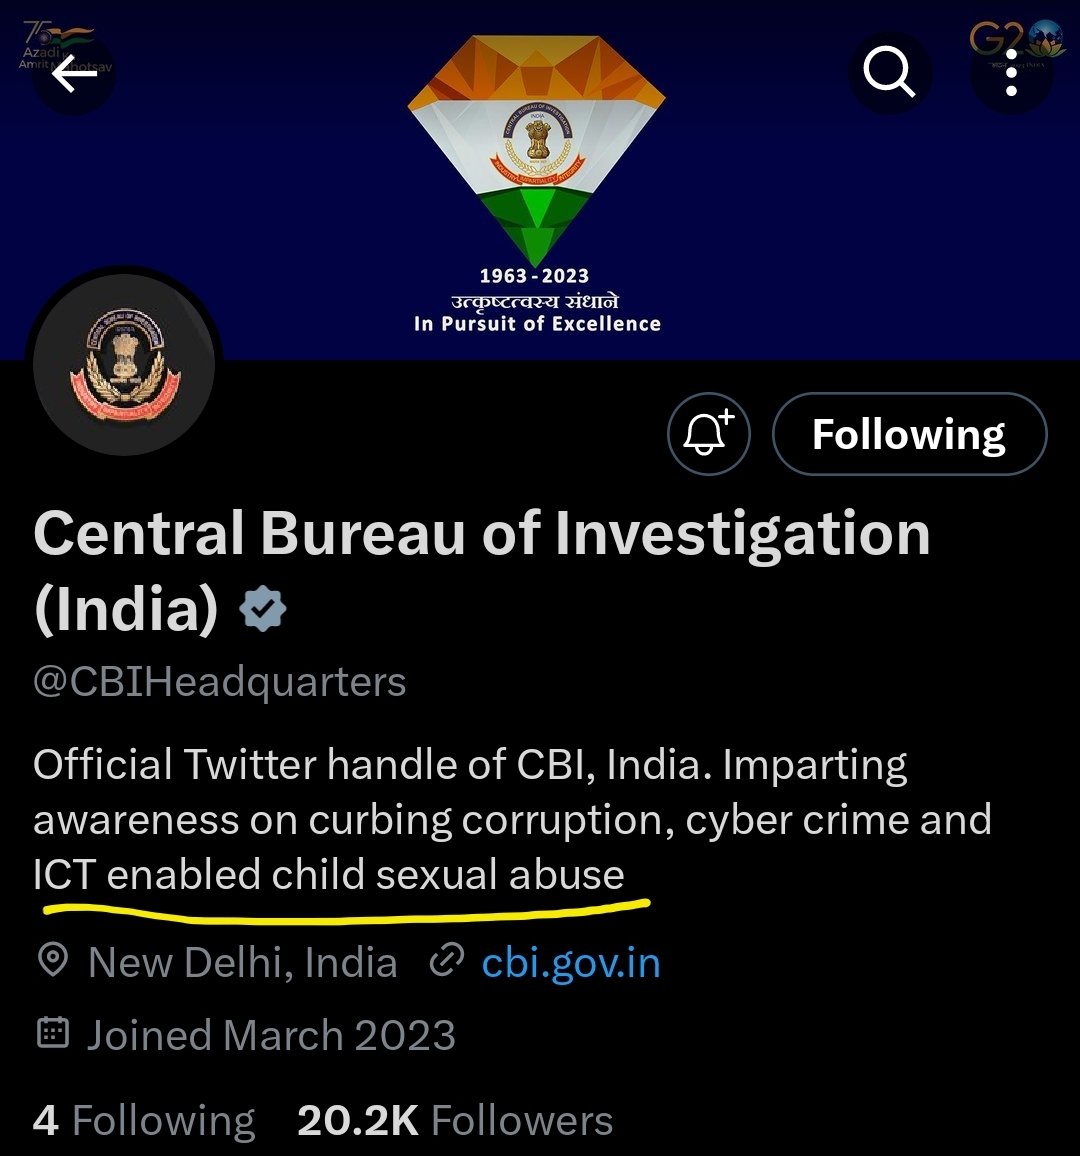 @CBIHeadquarters this comes under your purview of ICT enabled child sexual abuse! Ppl are posting abt crime & criminals openly on social media. Act now!
#SaveChildren 
@Copsview @HMOIndia @PMOIndia @mieknathshinde @Dev_Fadnavis @smritiirani @MLJ_GoI @MinistryWCD @KanoongoPriyank